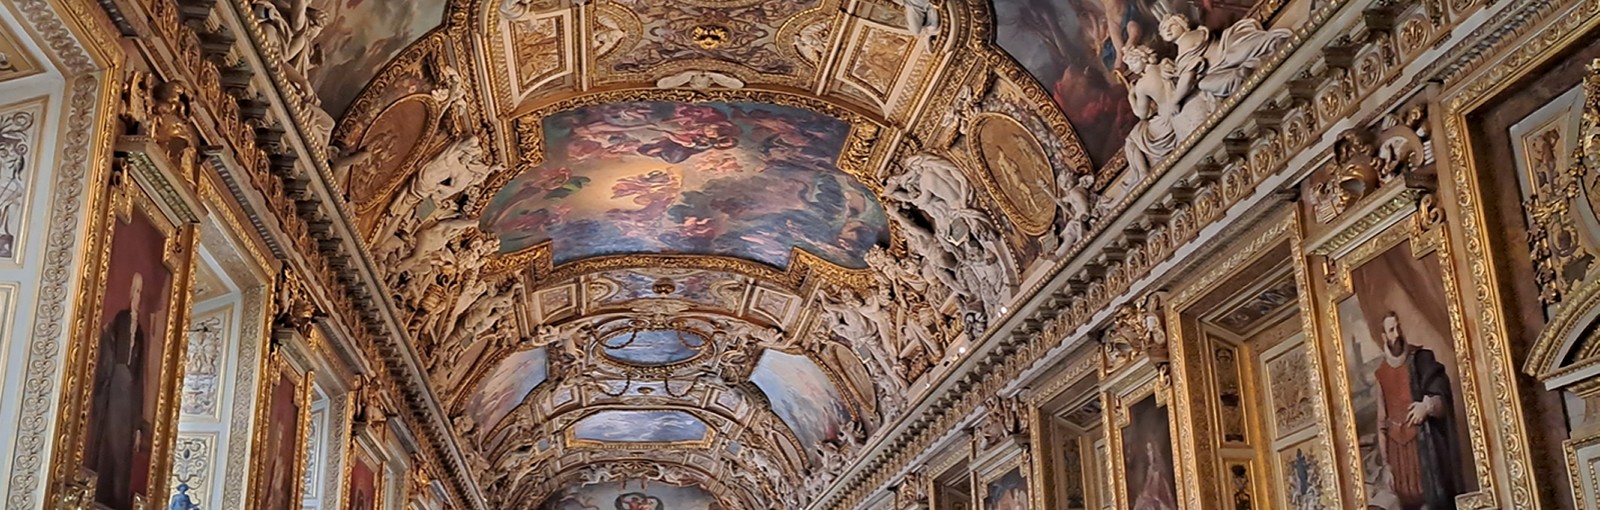 Tours Private Louvre museum tour with hotel pick-up - Museum Guided Tours - Paris Tours